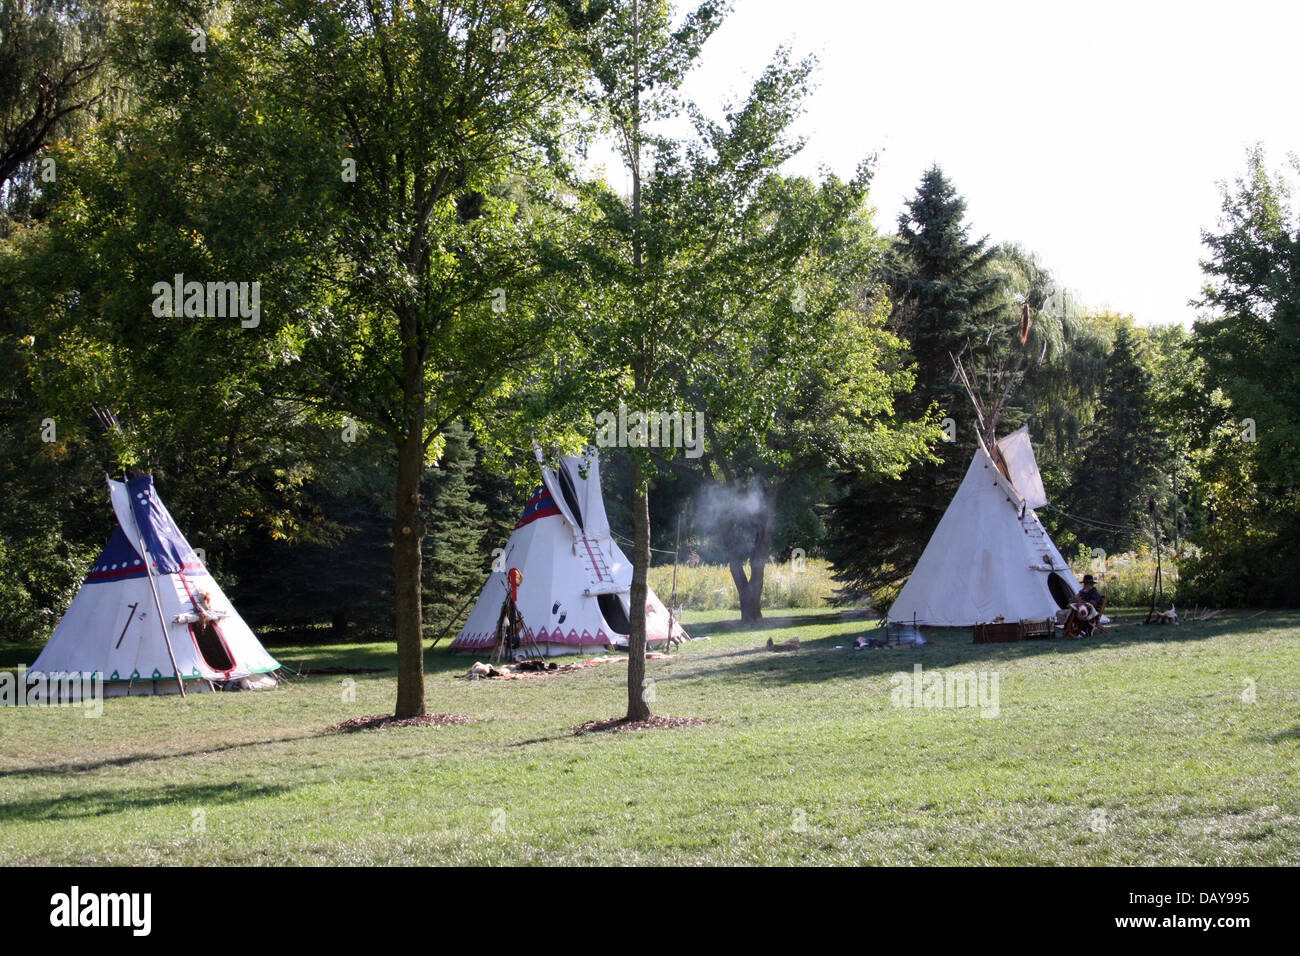 Native American Indian campsite with three tipis Stock Photo